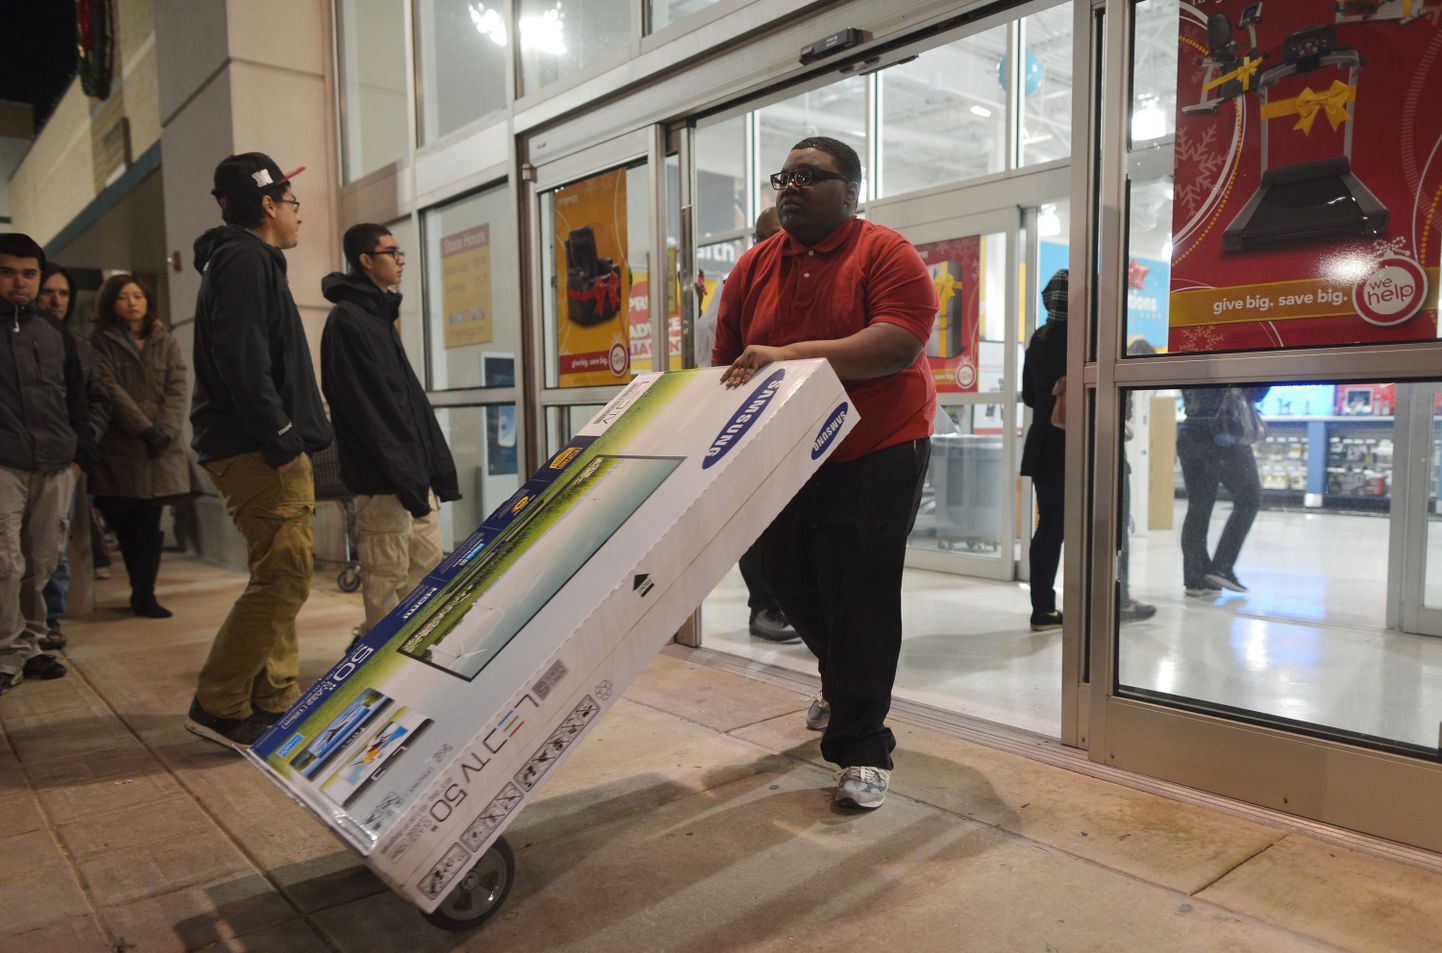 An employee wheels out a large TV newly purchased from a hh Gregg electronics store which began their Black Friday sales before midnight November 22, 2012 in Rockville, Maryland.   Thanksgiving, the last US holiday undisturbed by mass commercialization, is now victim to the ever advancing Christmas shopping season, with stores welcoming shopaholics before the family turkey can be taken from the oven.  AFP PHOTO / Mandel NGAN